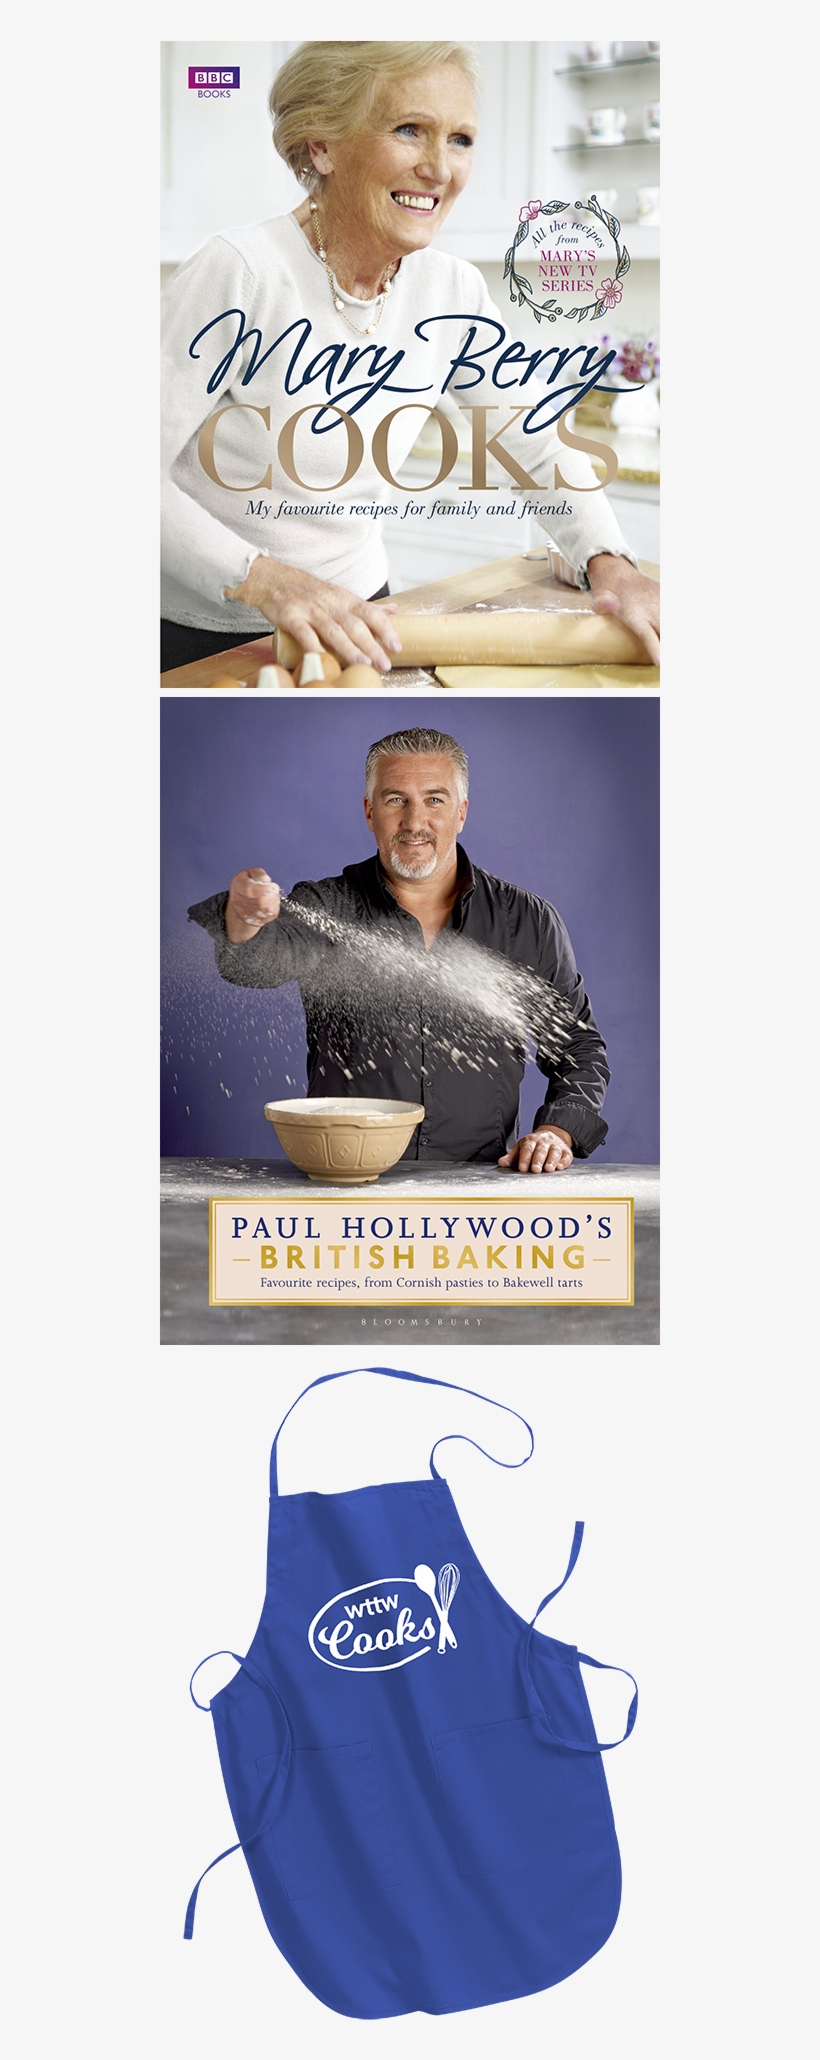 Mary Berry Cooks Cookbook, Paul Hollywood's British - Mary Berry Cooks, transparent png #323556